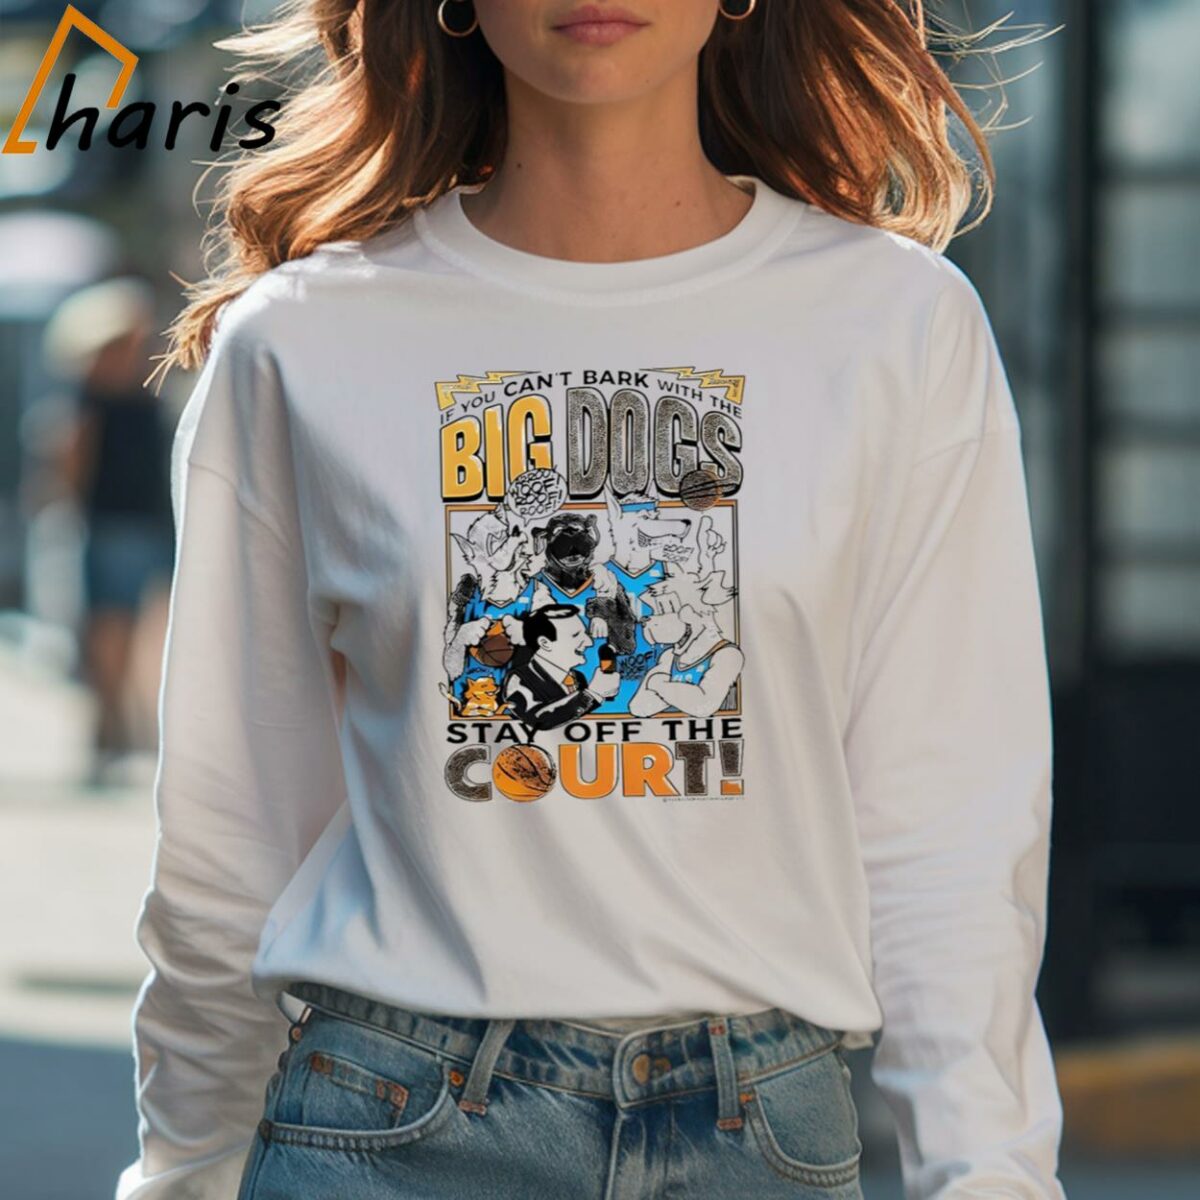 J dub Okc Thunder If You Cant Bark With The Big Dogs Stay Off The Court Shirt 4 Long sleeve shirt